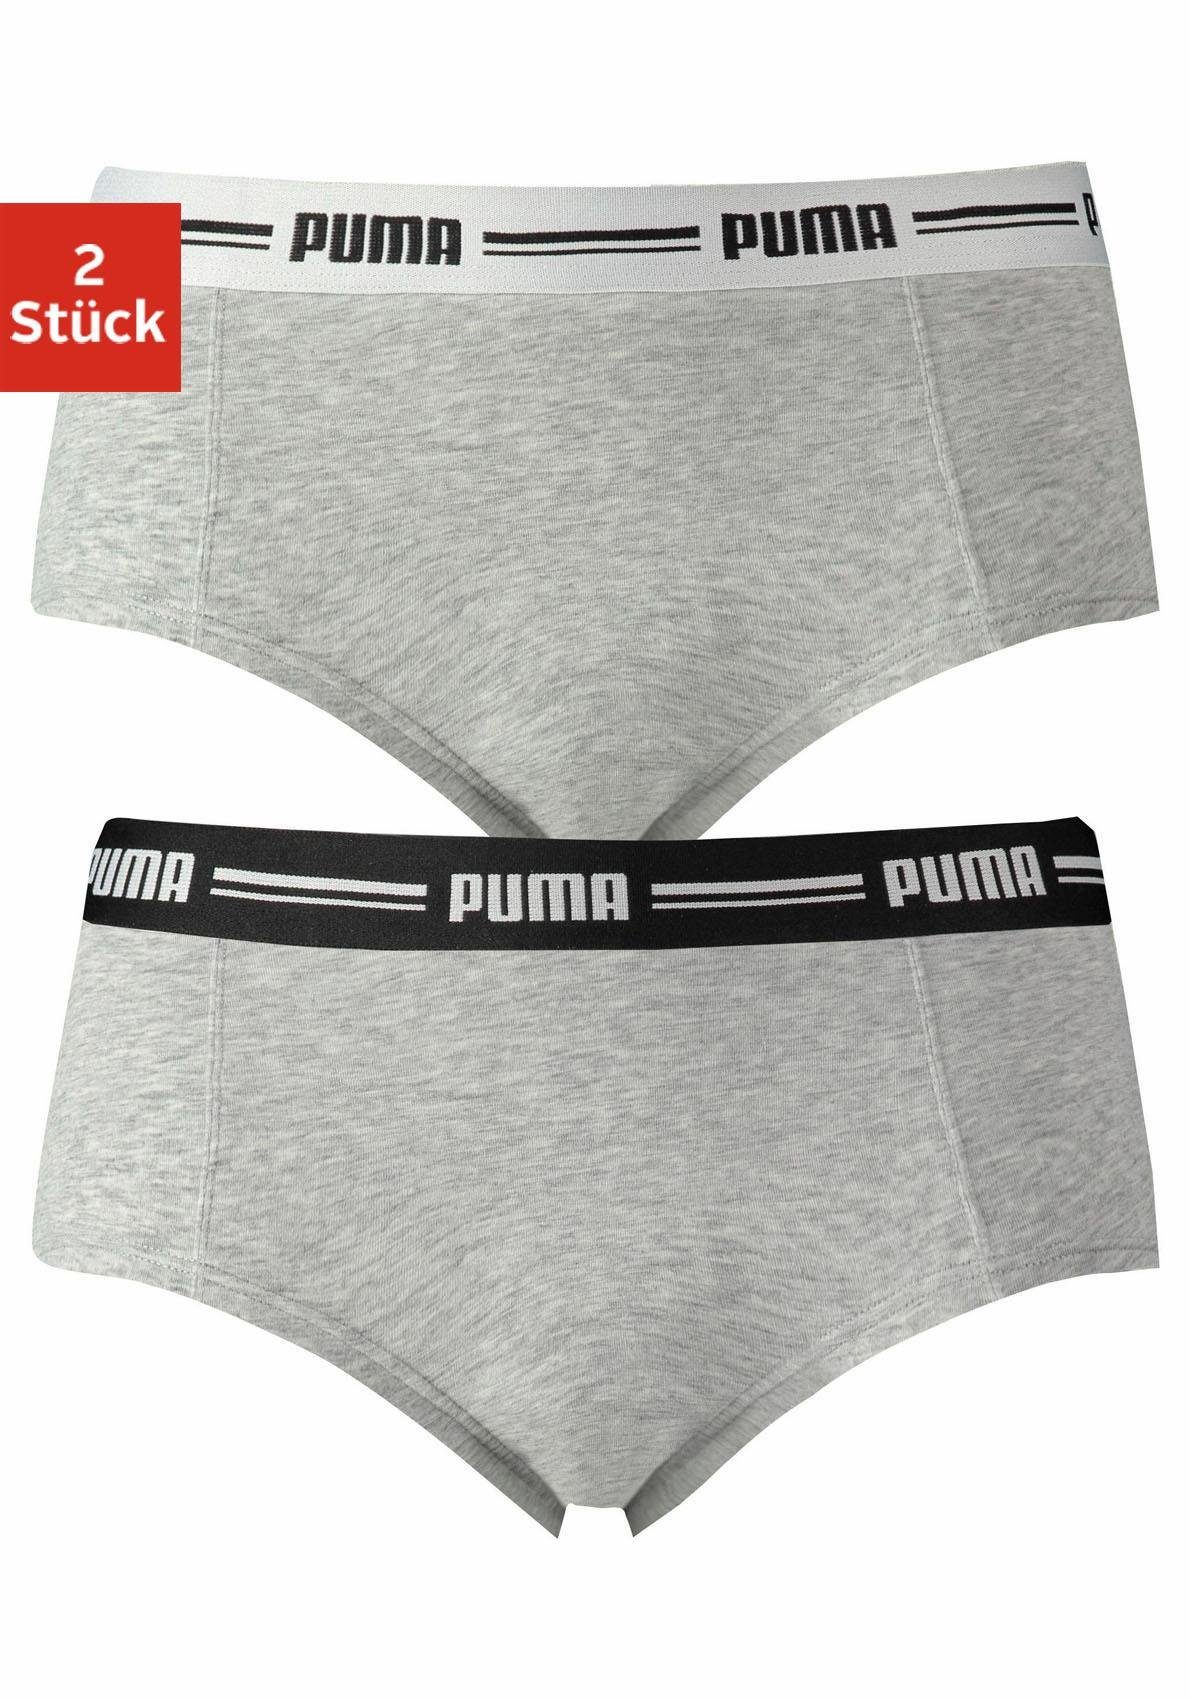 grau-meliert Panty Iconic PUMA 2-St) (Packung,